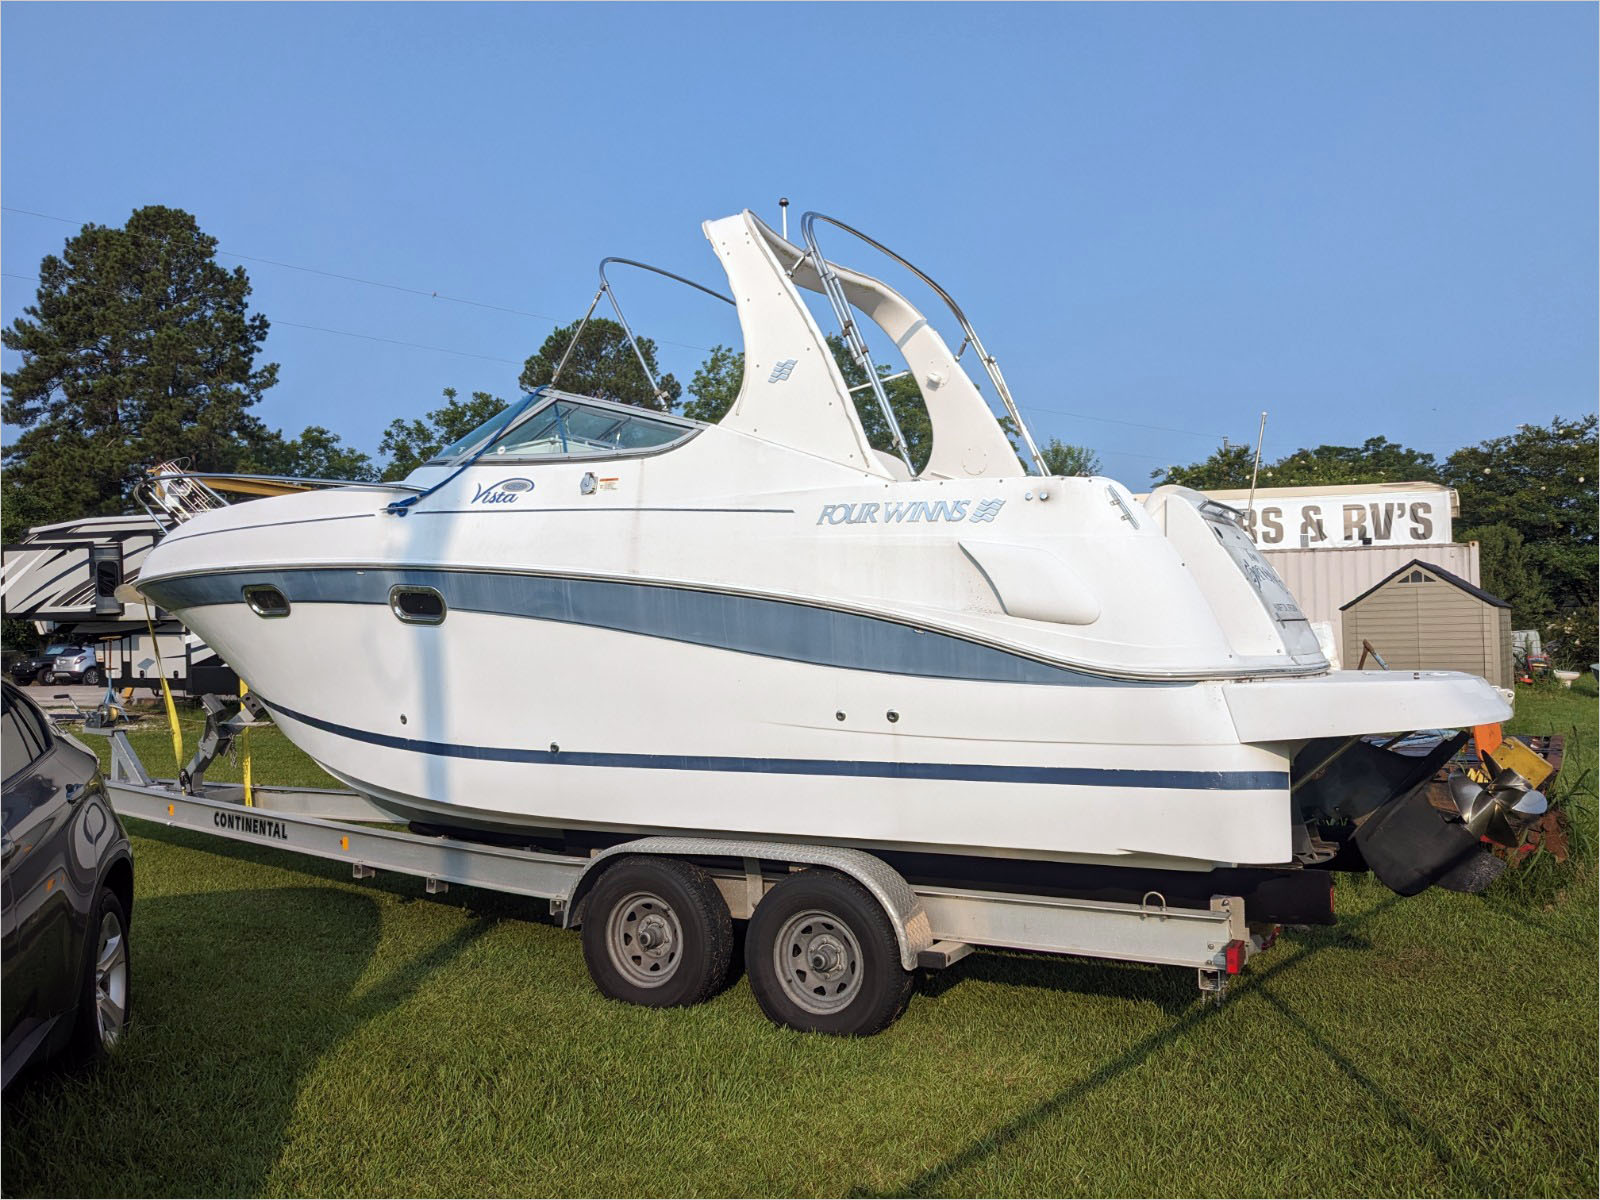 yacht salvage auctions